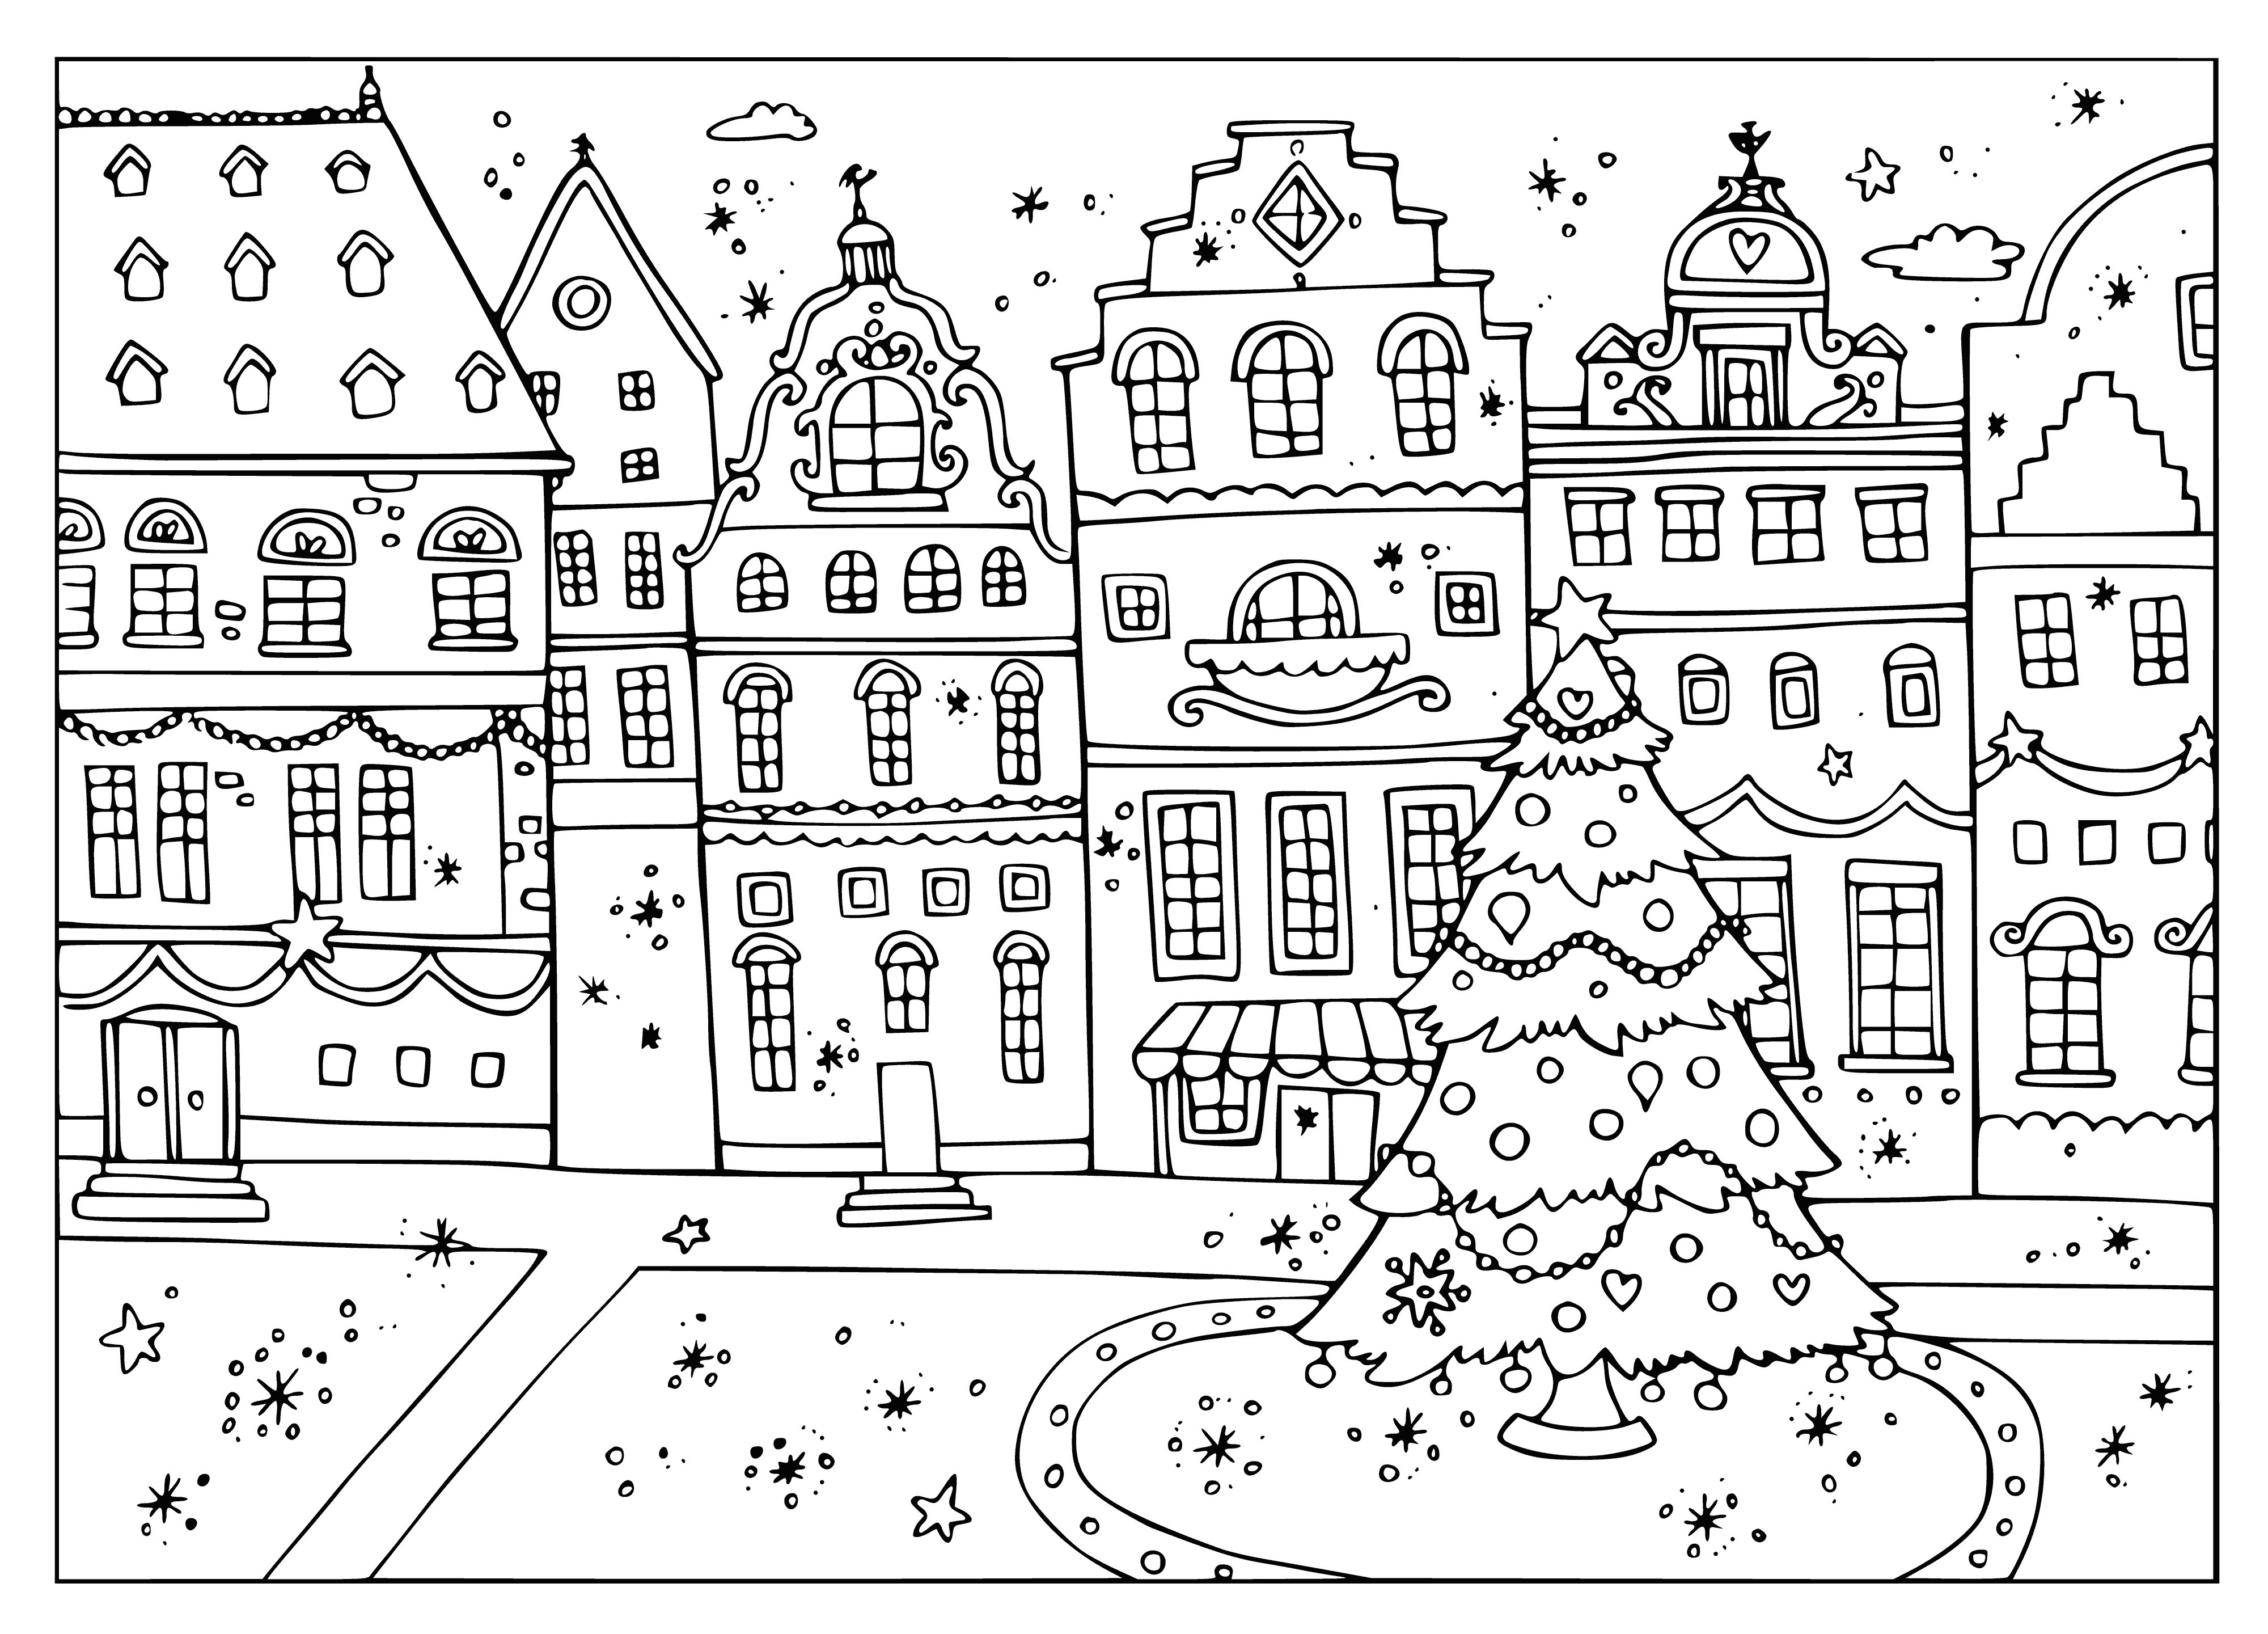 coloring page: A spruce is lit up with colorful lights and decorated with a star on top in a square. #Christmas